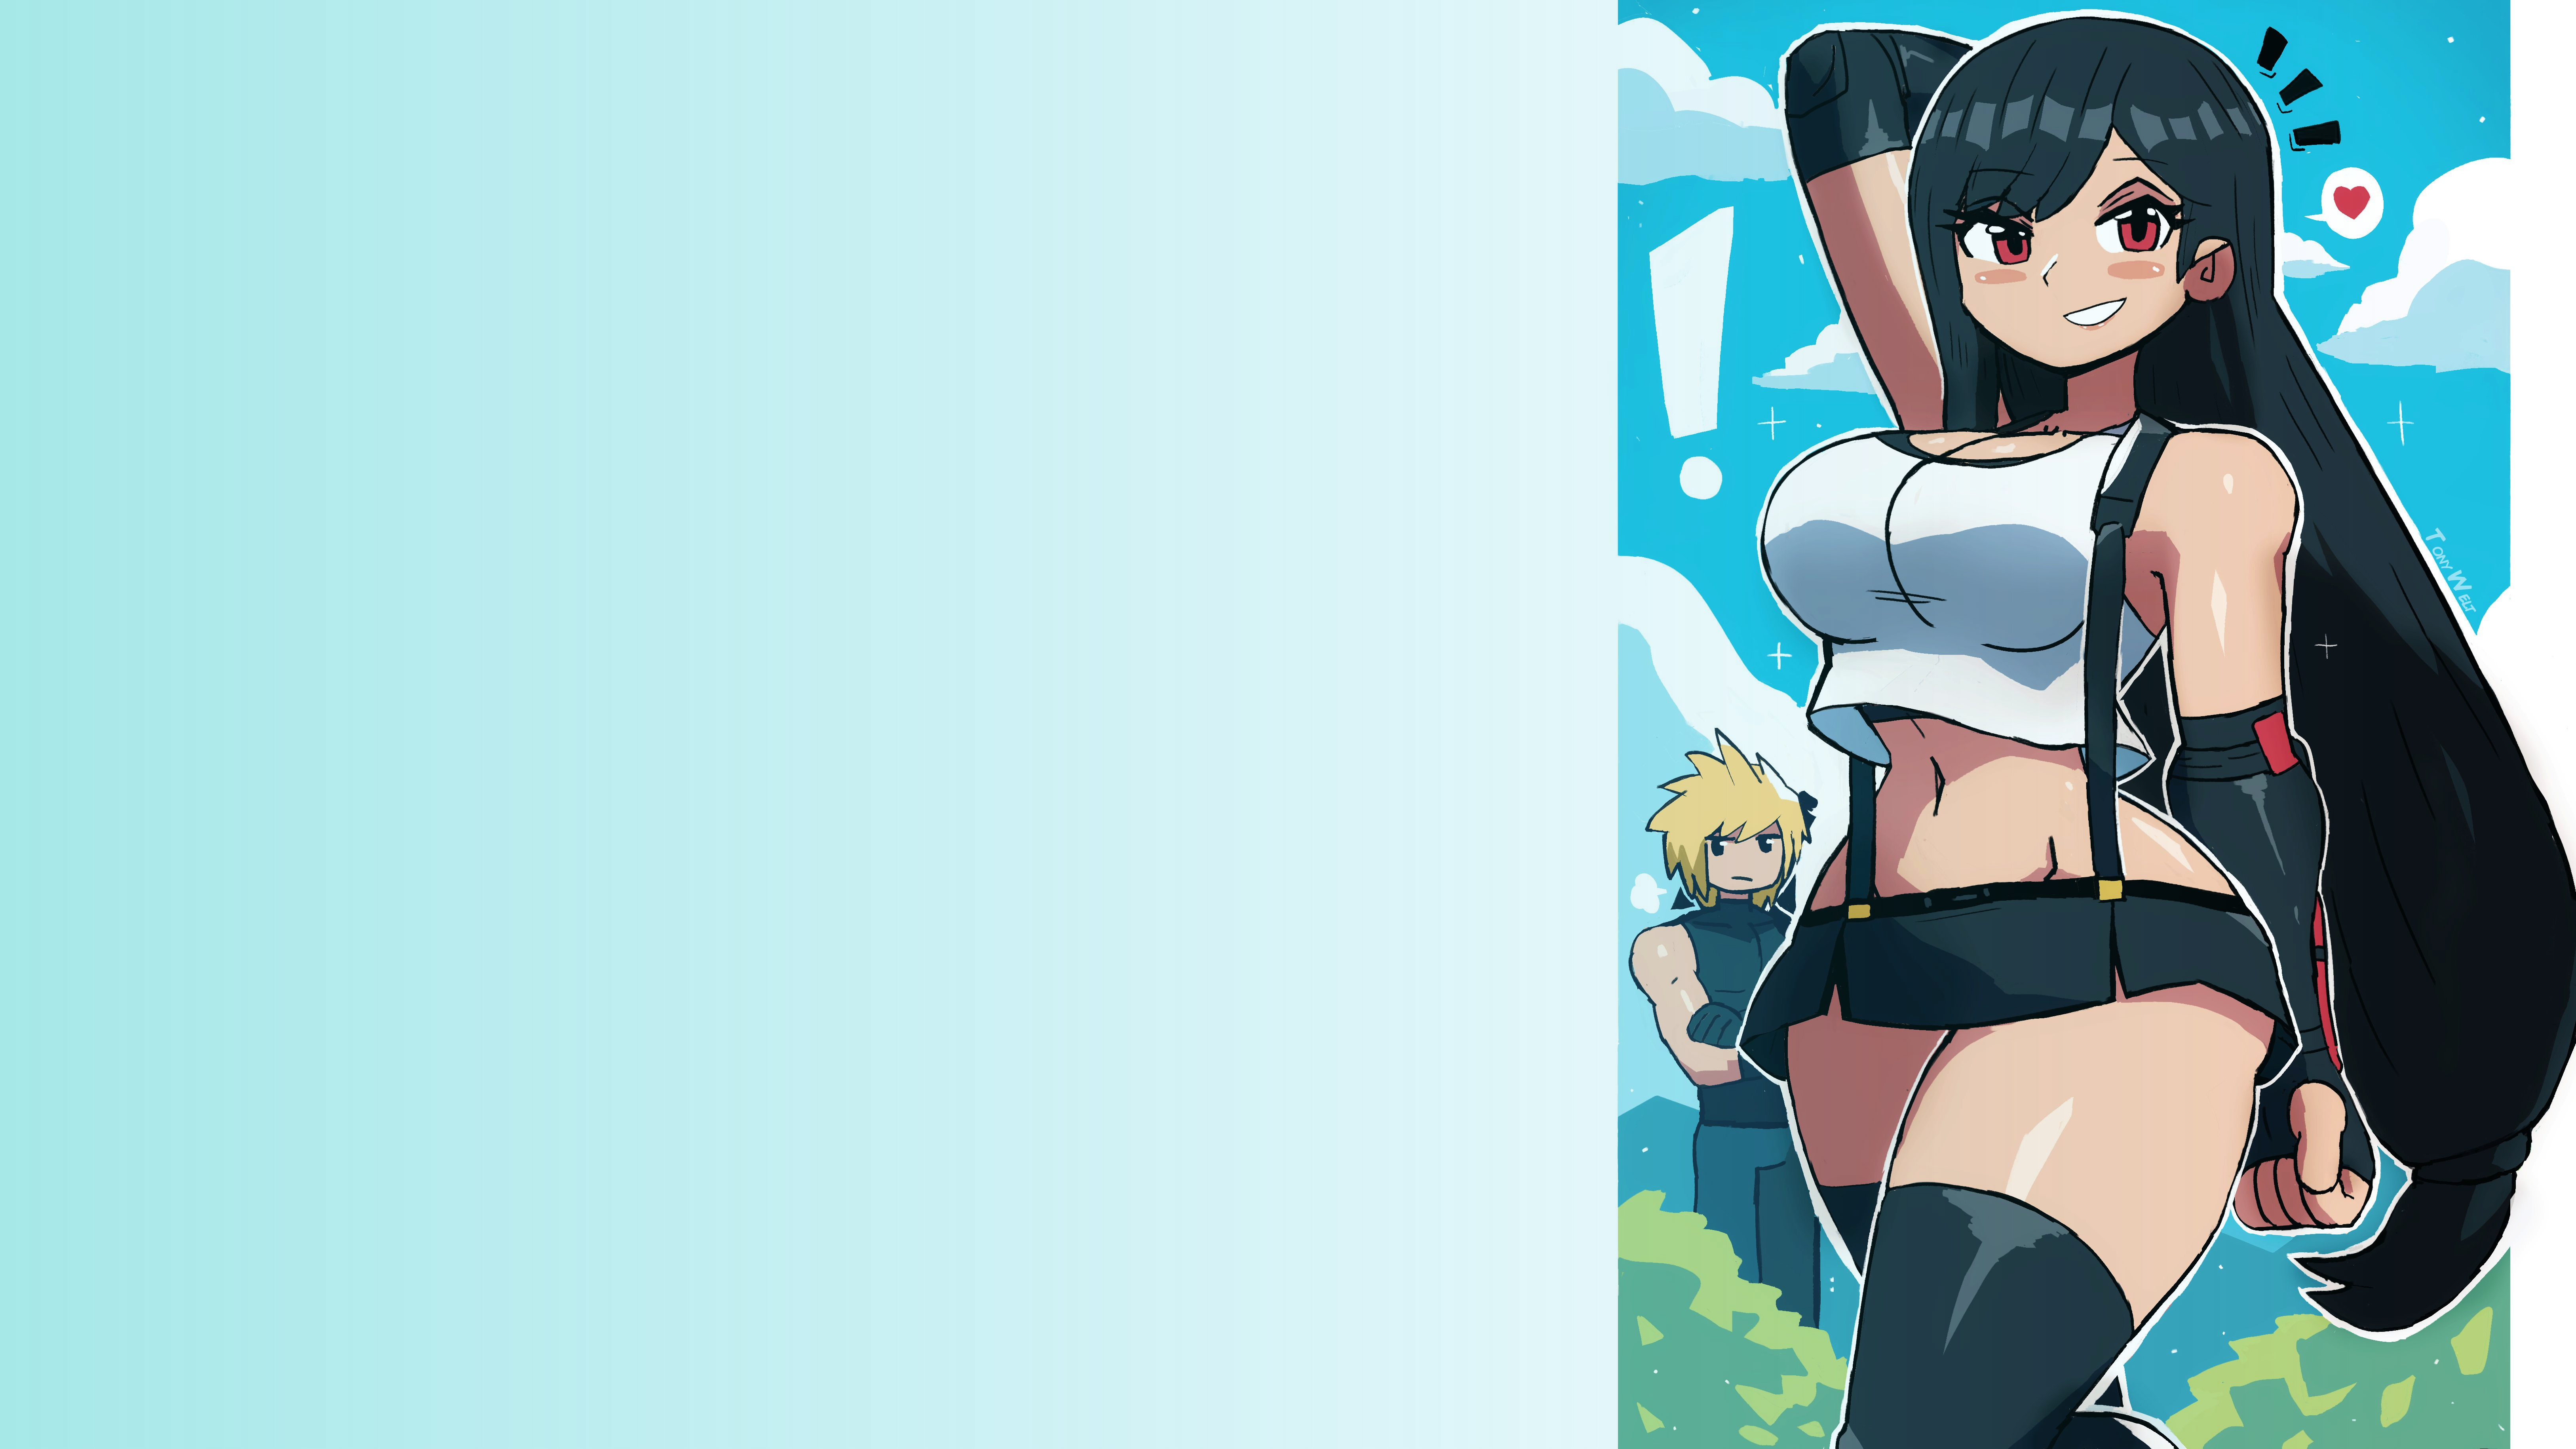 Anime 6507x3660 video games Tifa Lockhart Final Fantasy VII Final Fantasy VII: Remake long hair black hair dark hair big boobs arm(s) behind head arm(s) behind back bare midriff belly belly button suspenders miniskirt thighs thighs together thigh-highs black thigh highs gloves black gloves white tops white shirt white tank top bare shoulders bangs blunt bangs blonde muscular Spiky Hair heart (design) brown eyes clouds arms up Cloud Strife surprised blue background bright